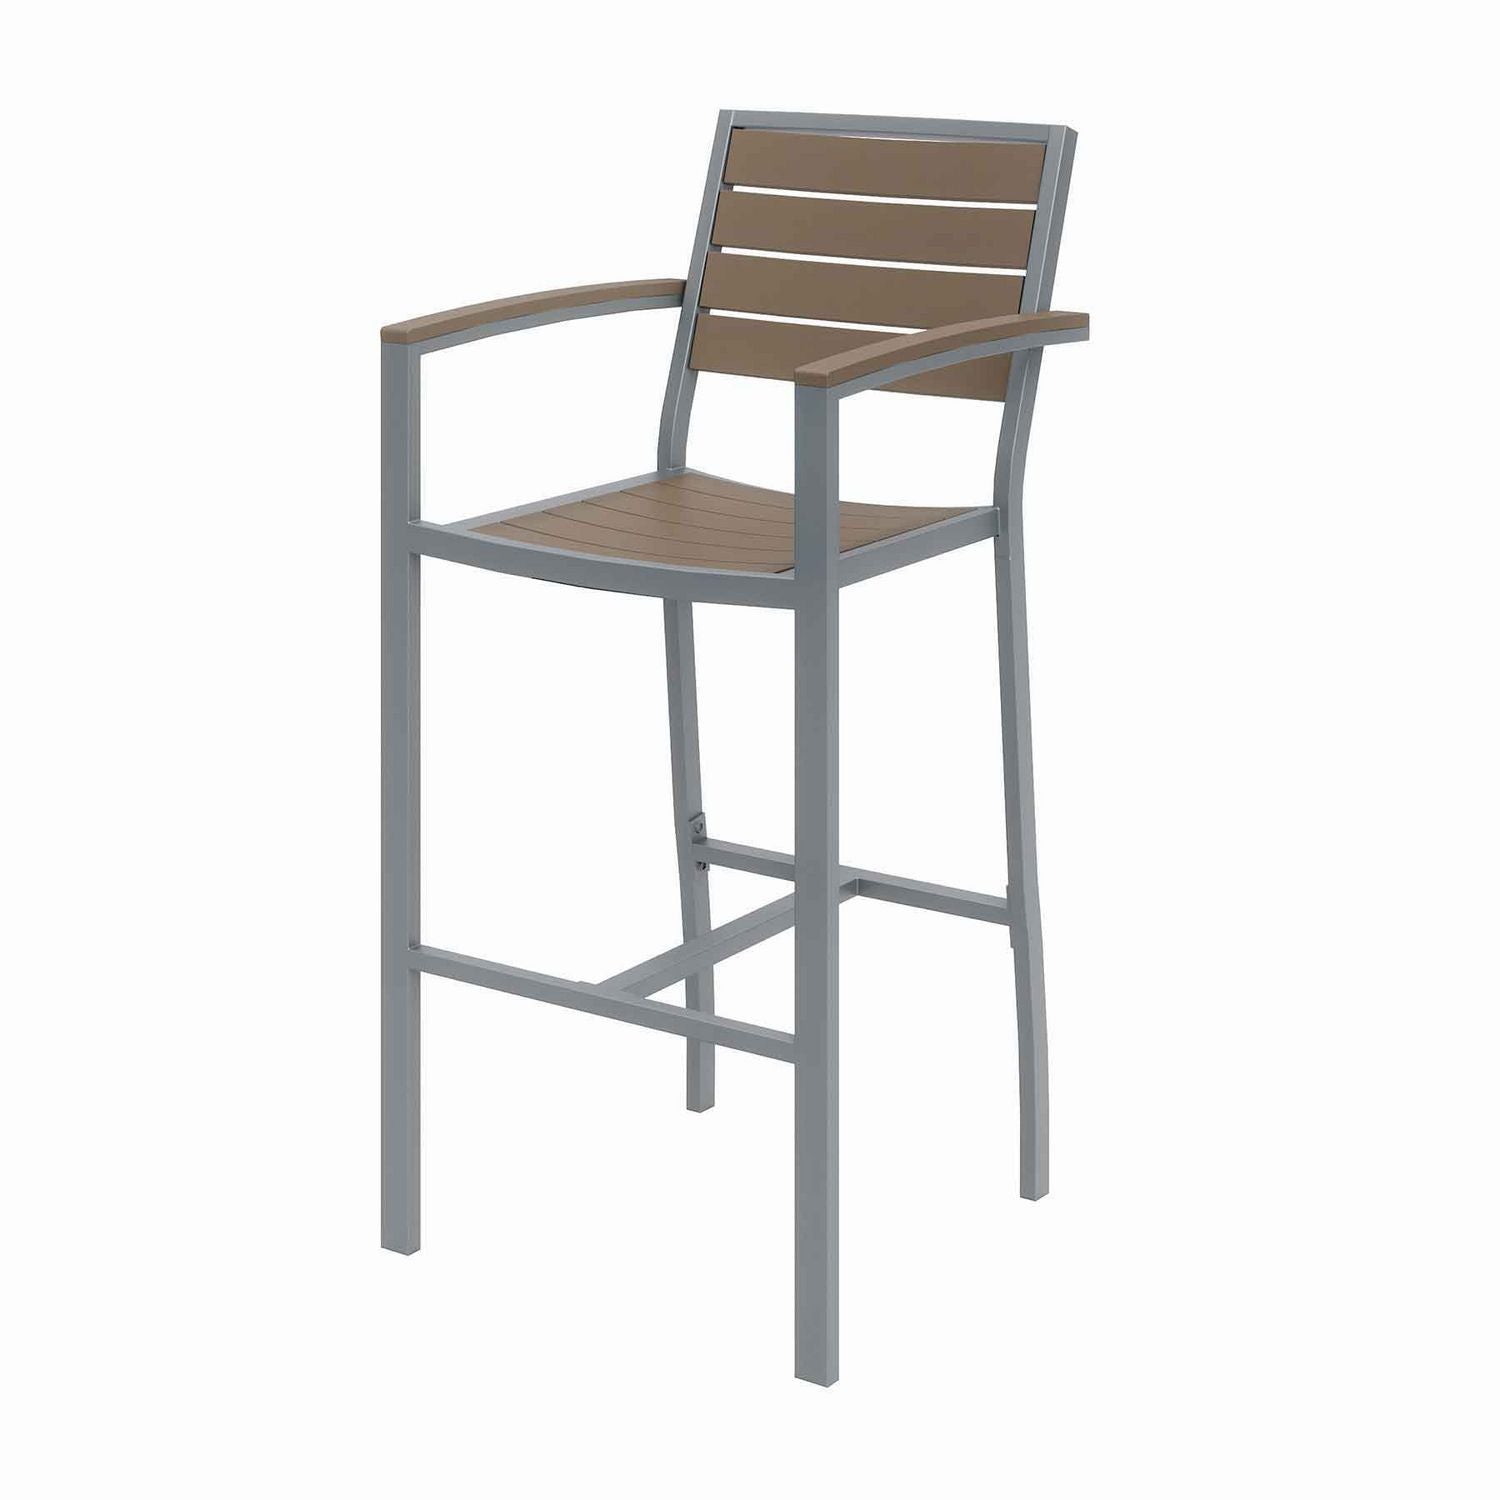 eveleen-outdoor-bistro-patio-table-w-four-mocha-powder-coated-polymer-barstools-round-41h-gray-ships-in-4-6-bus-days_kfi840031918505 - 3